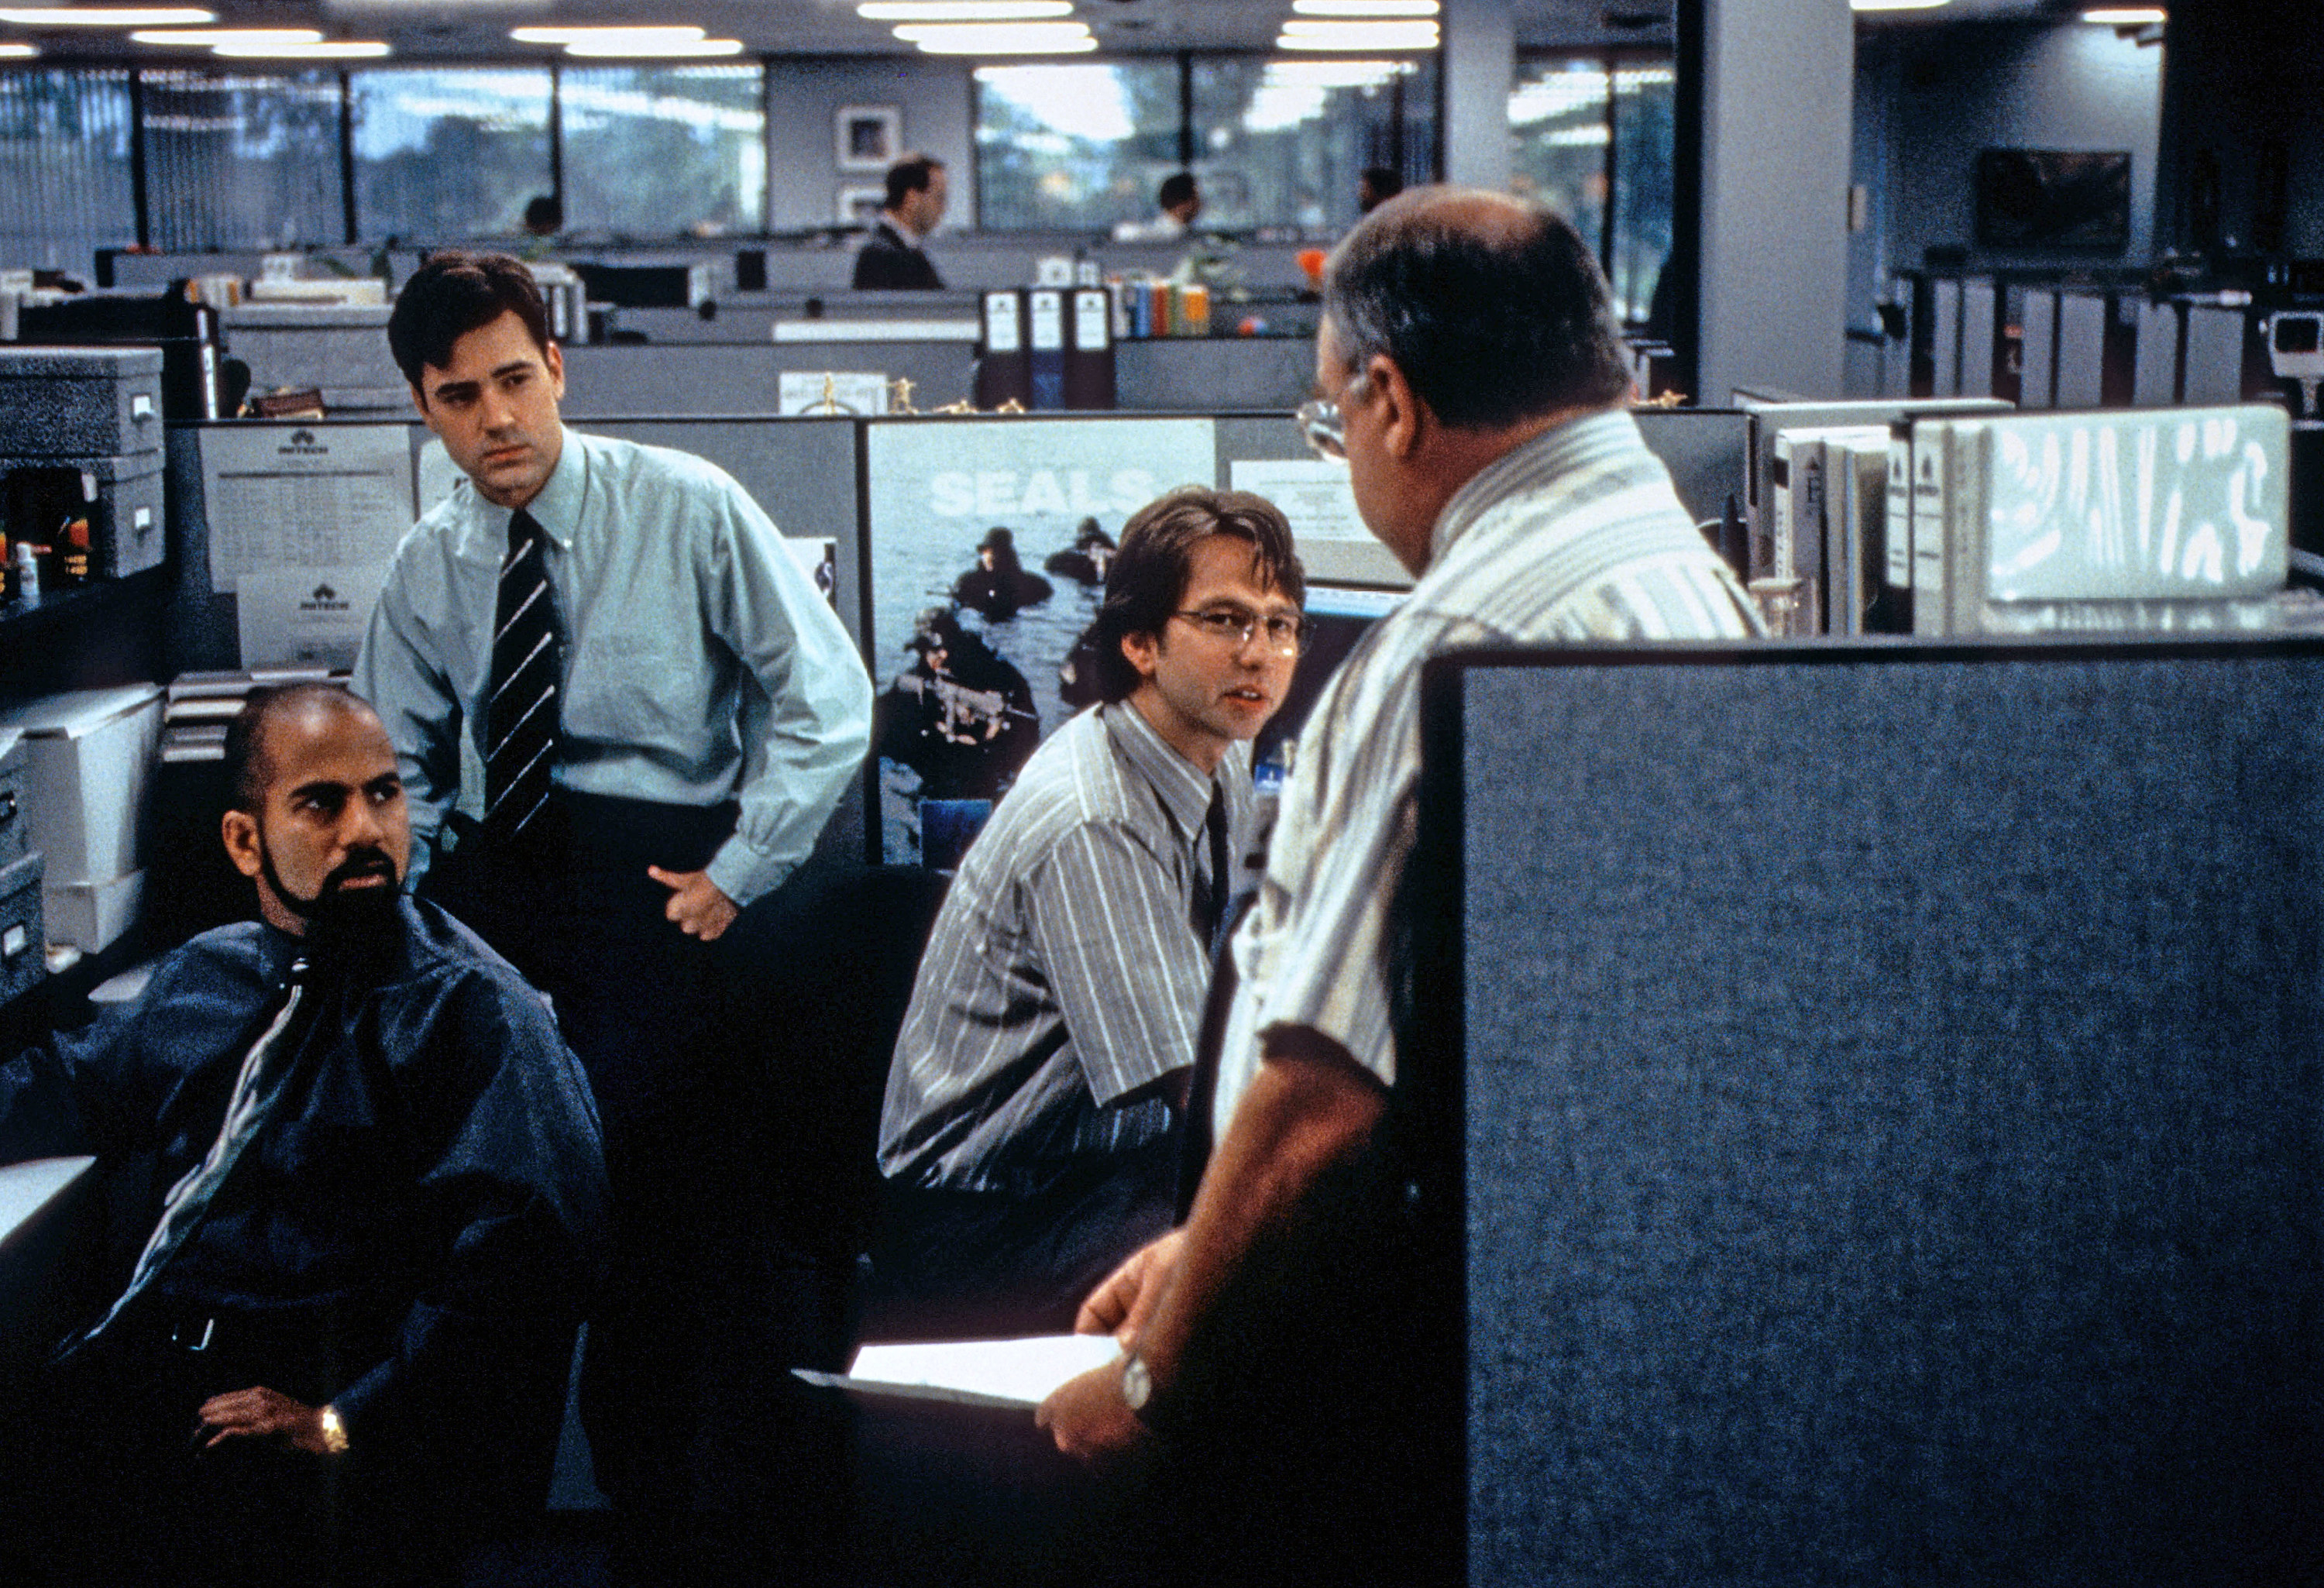 (L-R): Samir (Ajay Naidu), Peter (Ron Livingston), Michael (David Herman) and Tom (Richard Riehle) in &quot;Office Space&quot;